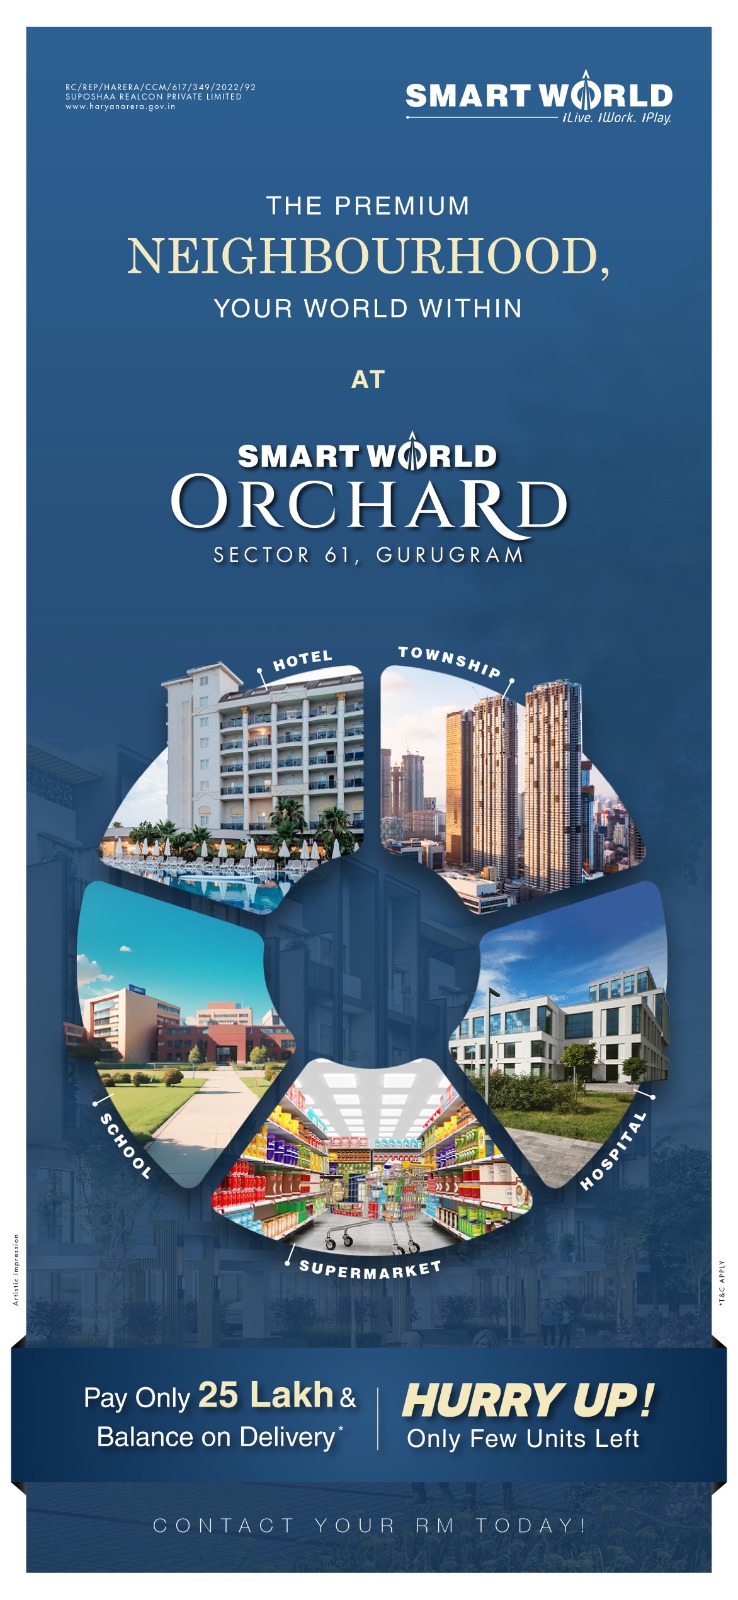 Hurry up! only few units left at Smart World Orchard in Golf Course Extension Road, Gurgaon Update